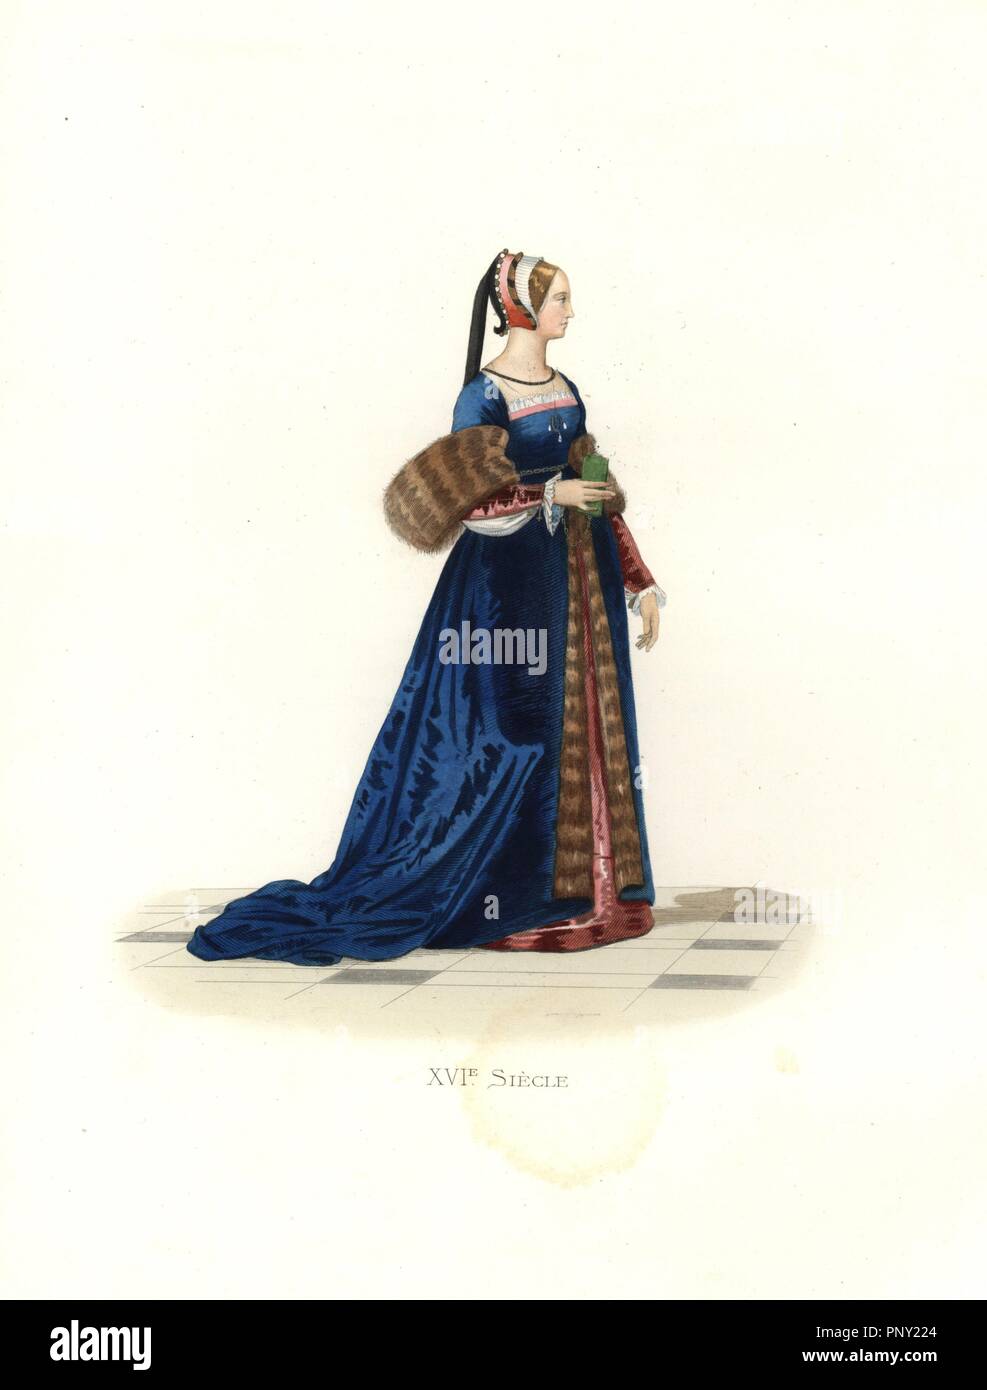 Lady at the court of Francis I wearing a dress of red silk covered by a  fur-lined robe of blue silk with a long train.. Handcolored illustration by  E. Lechevallier-Chevignard, lithographed by